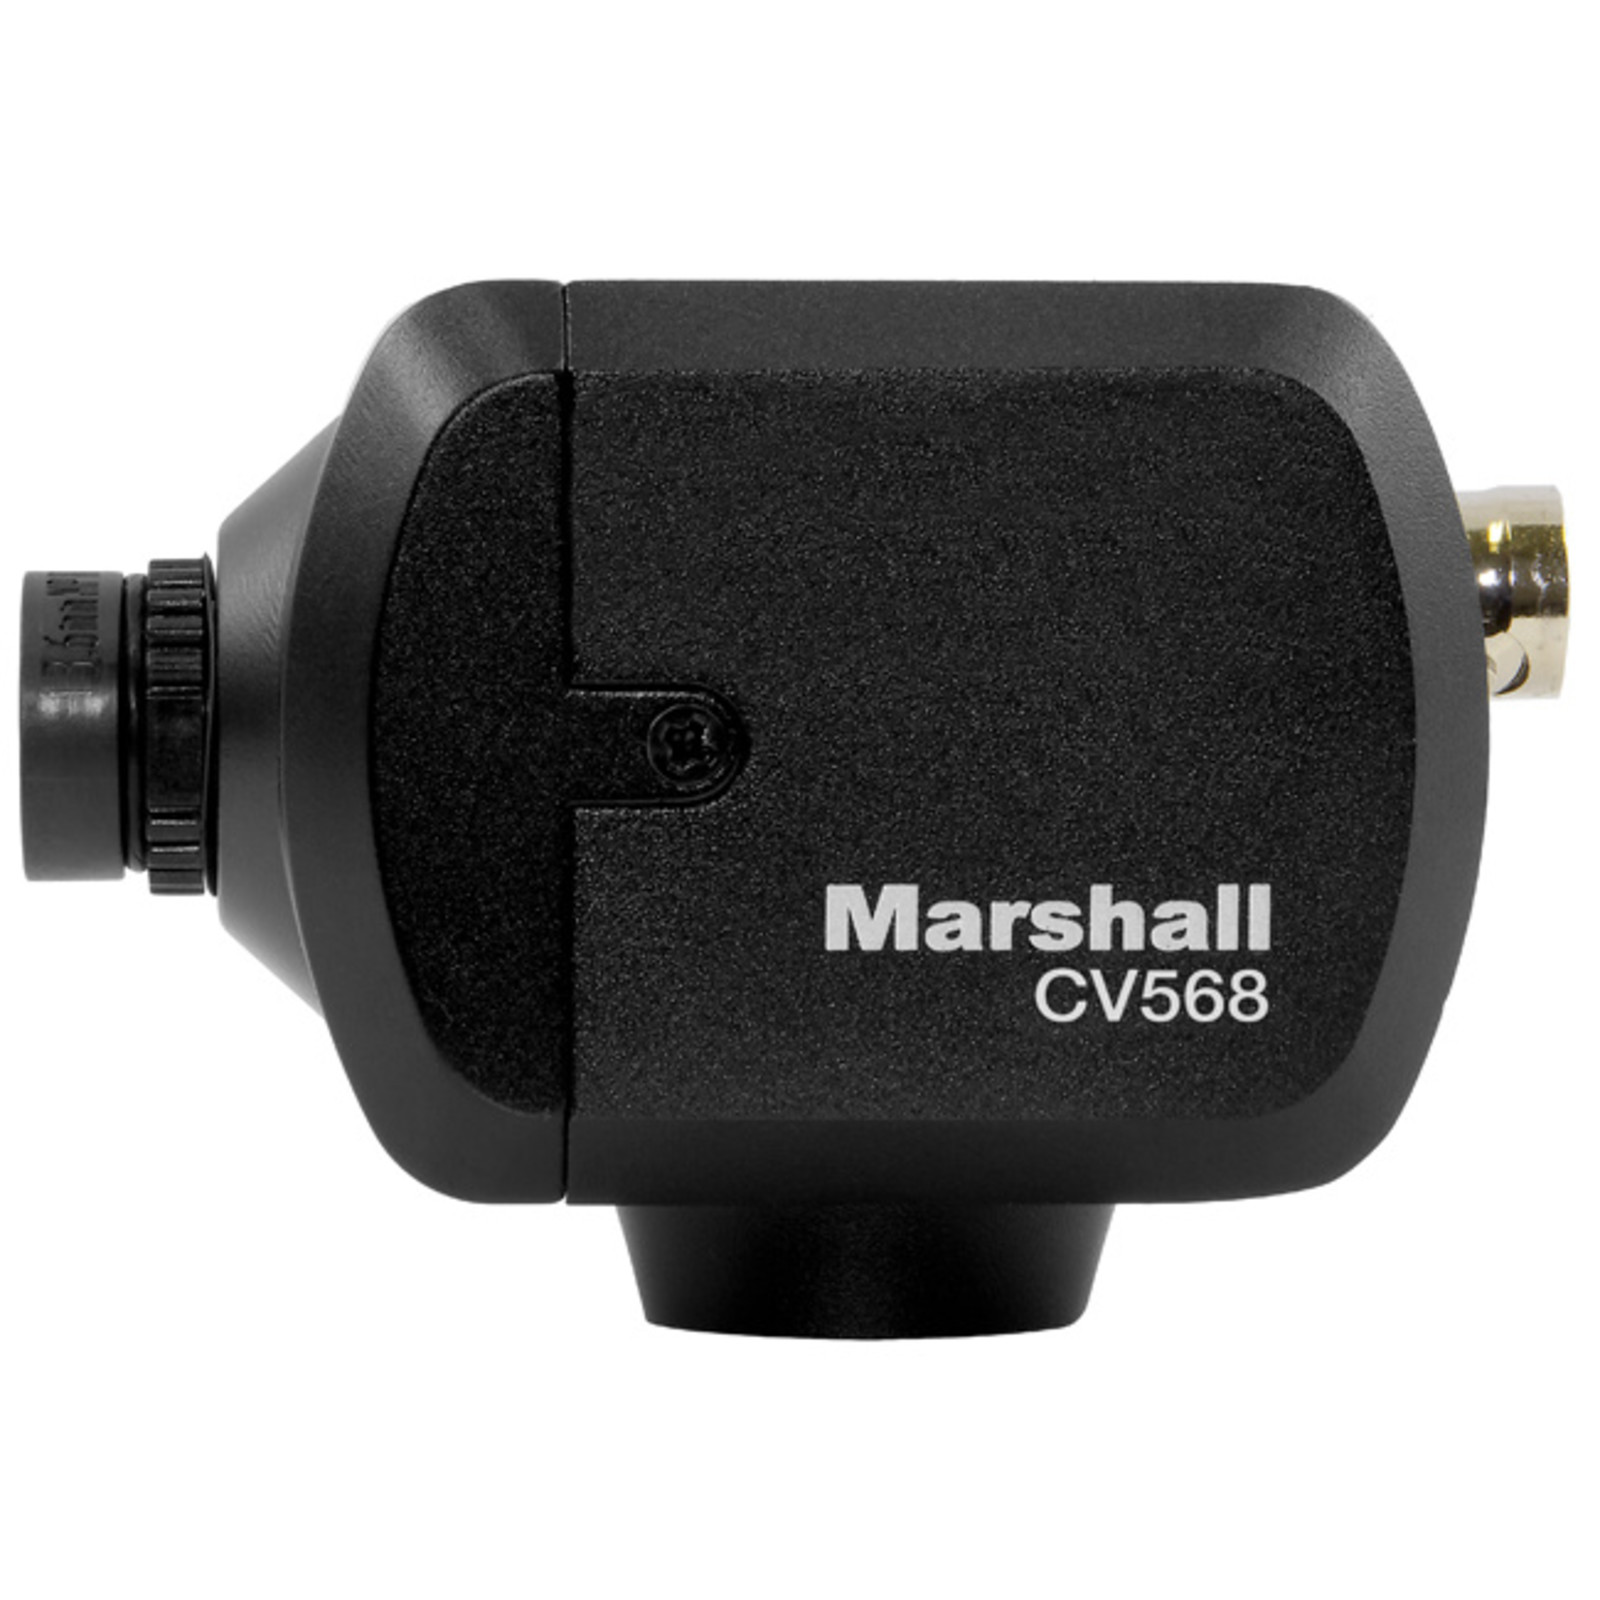 Marshall Global Shutter & Genlock Mini Broadcast Camera with 4.4mm Interchangeable Lens – 3G-SDI & HDMI Outputs